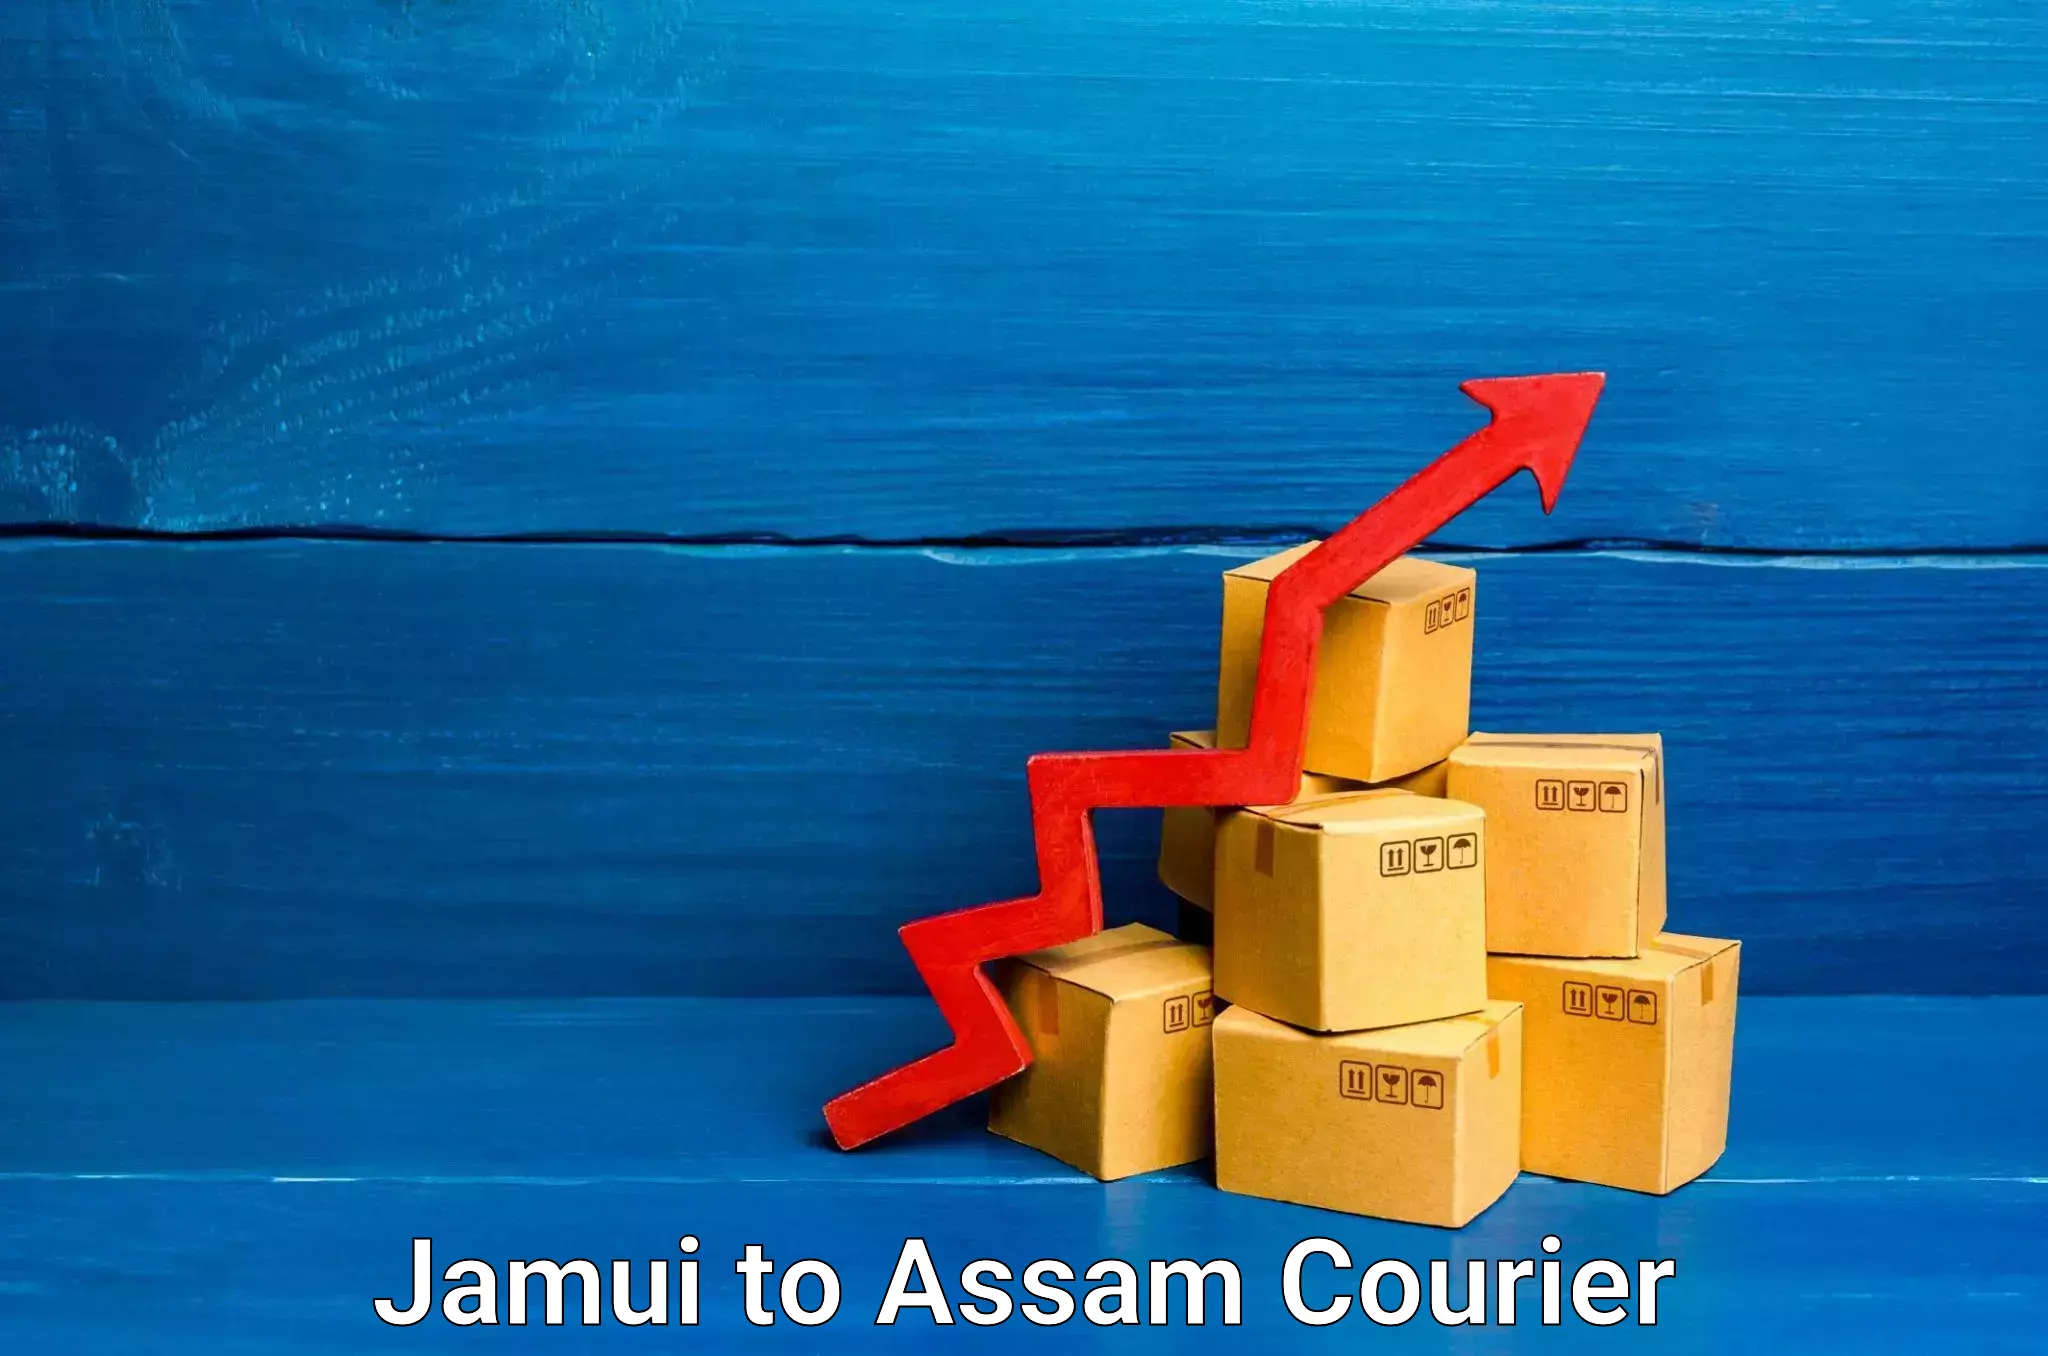 Efficient relocation services Jamui to Lala Assam